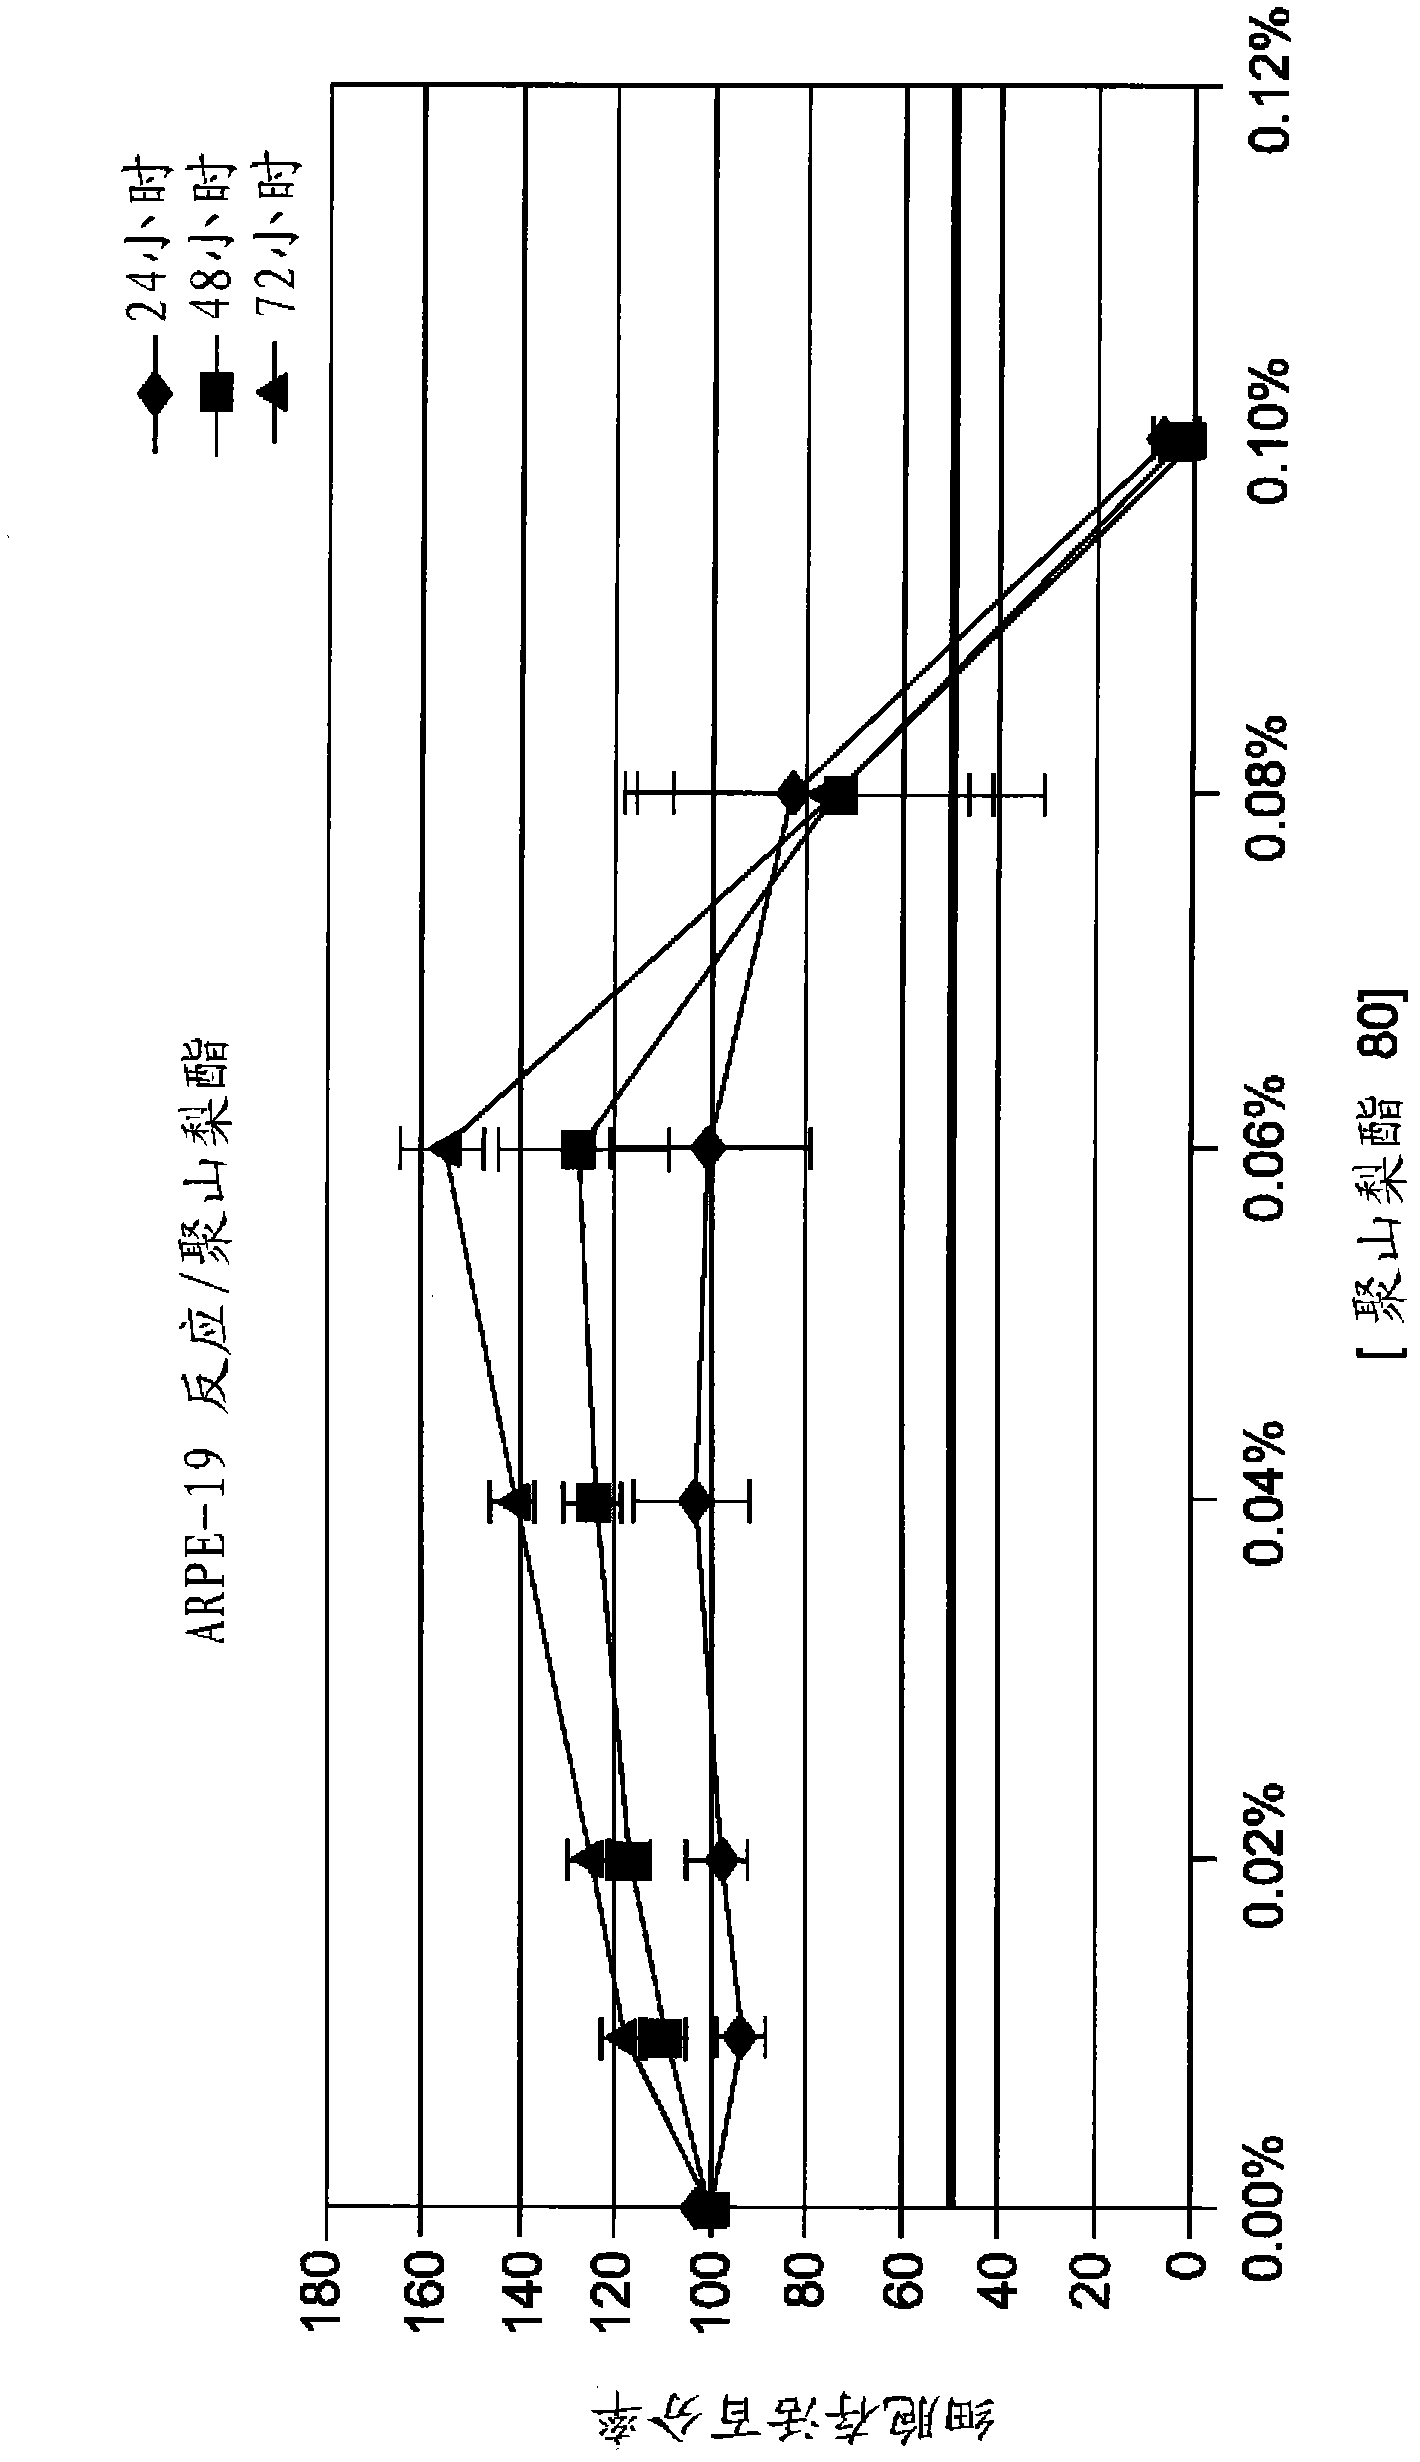 Method for treating atrophic age related macular degeneration